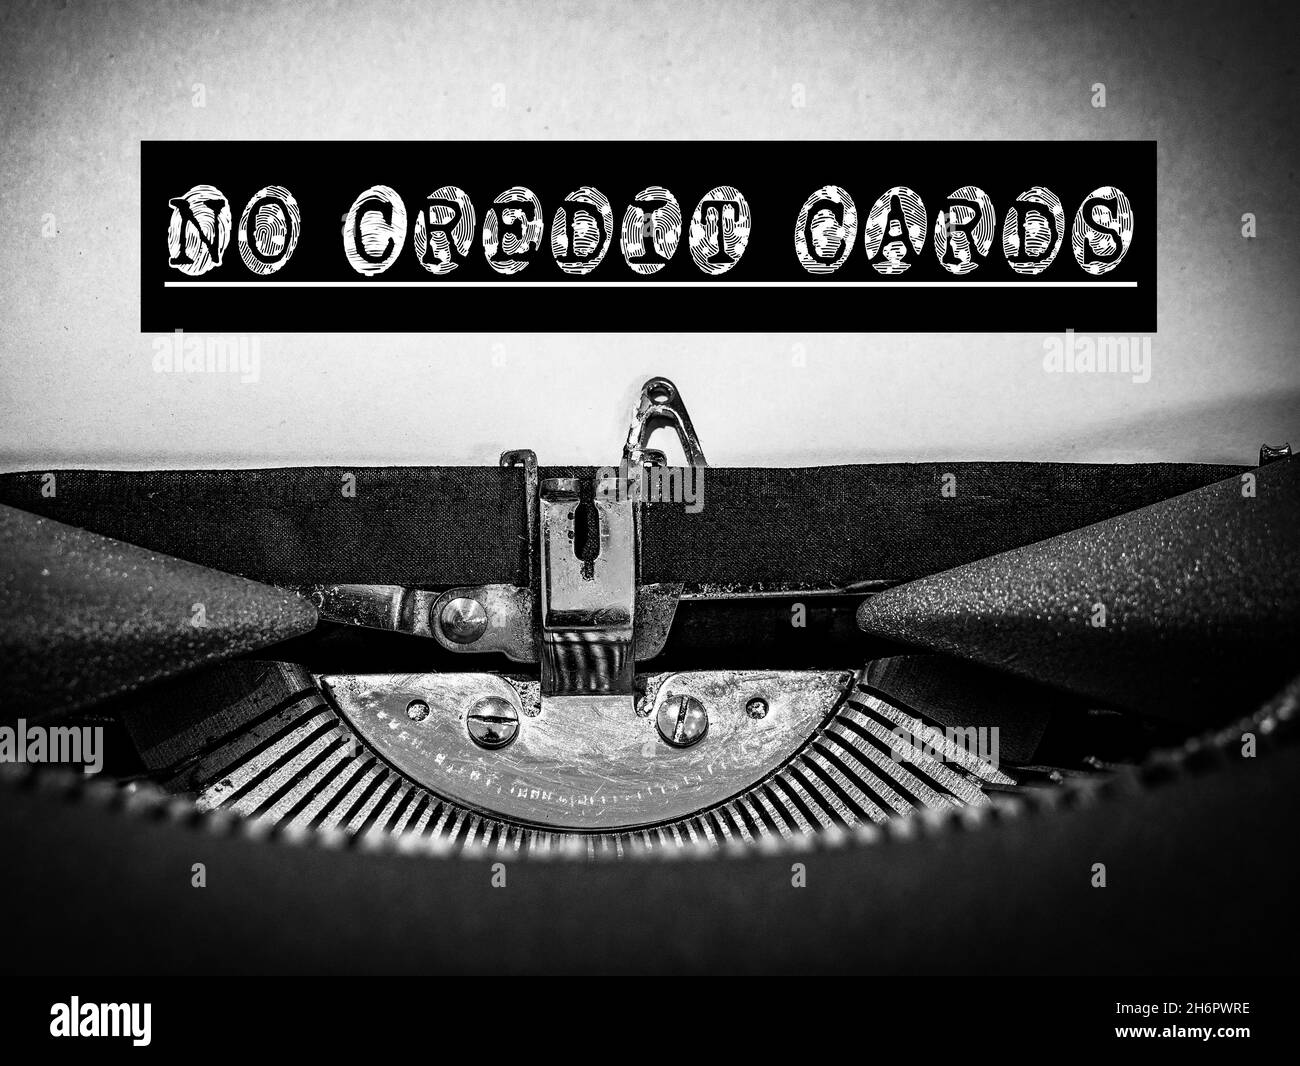 NO CREDIT CARDS displayed on a classic vintage mechanical typewriter with a black border around the text and a white underline in a B&W tone Stock Photo